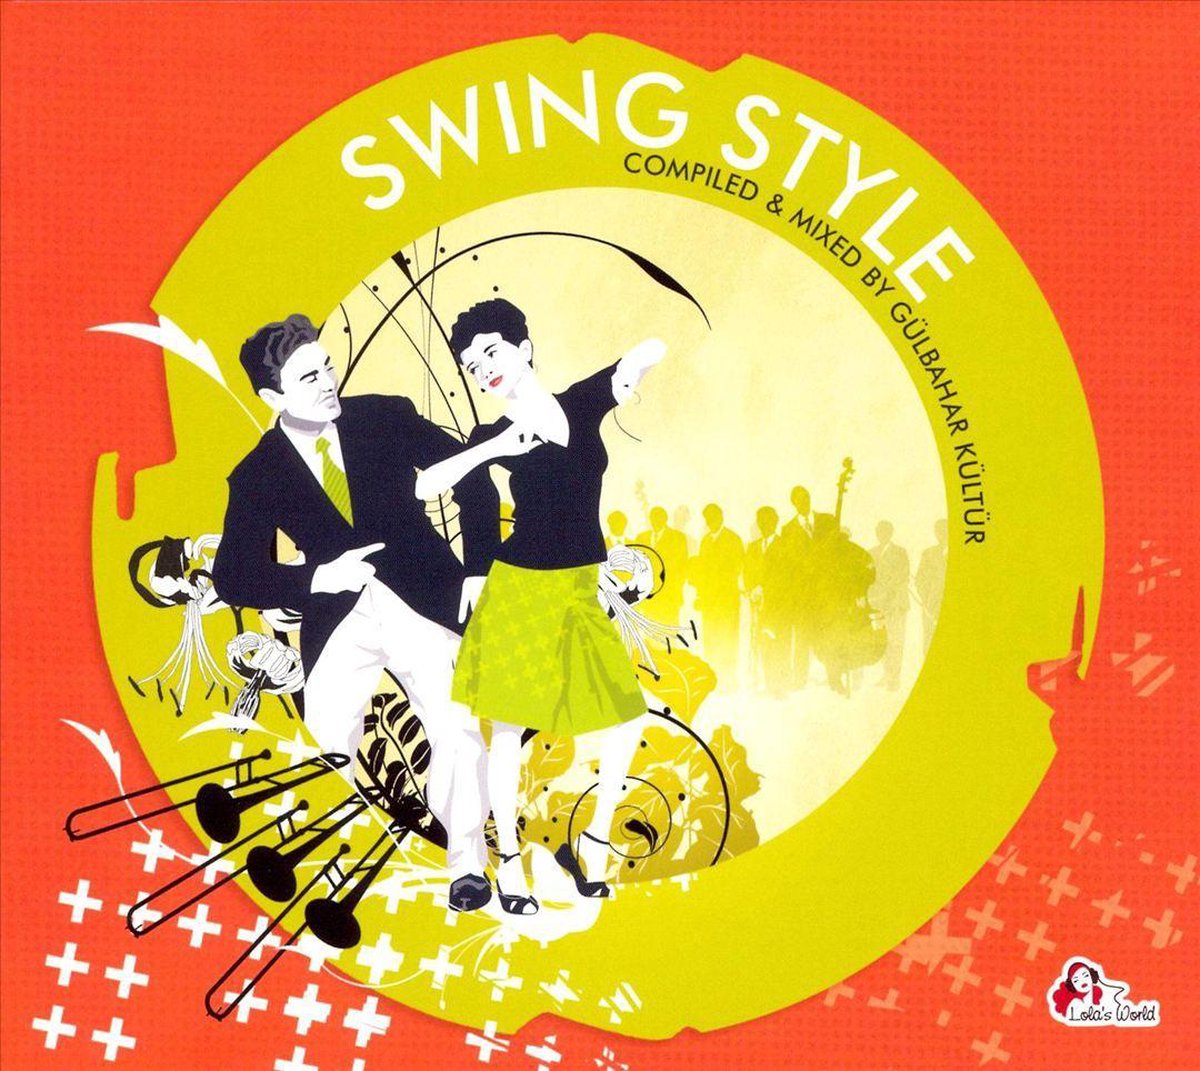 Afbeelding van product Swing Style Compiled and Mixed by Gulbahar Kultur